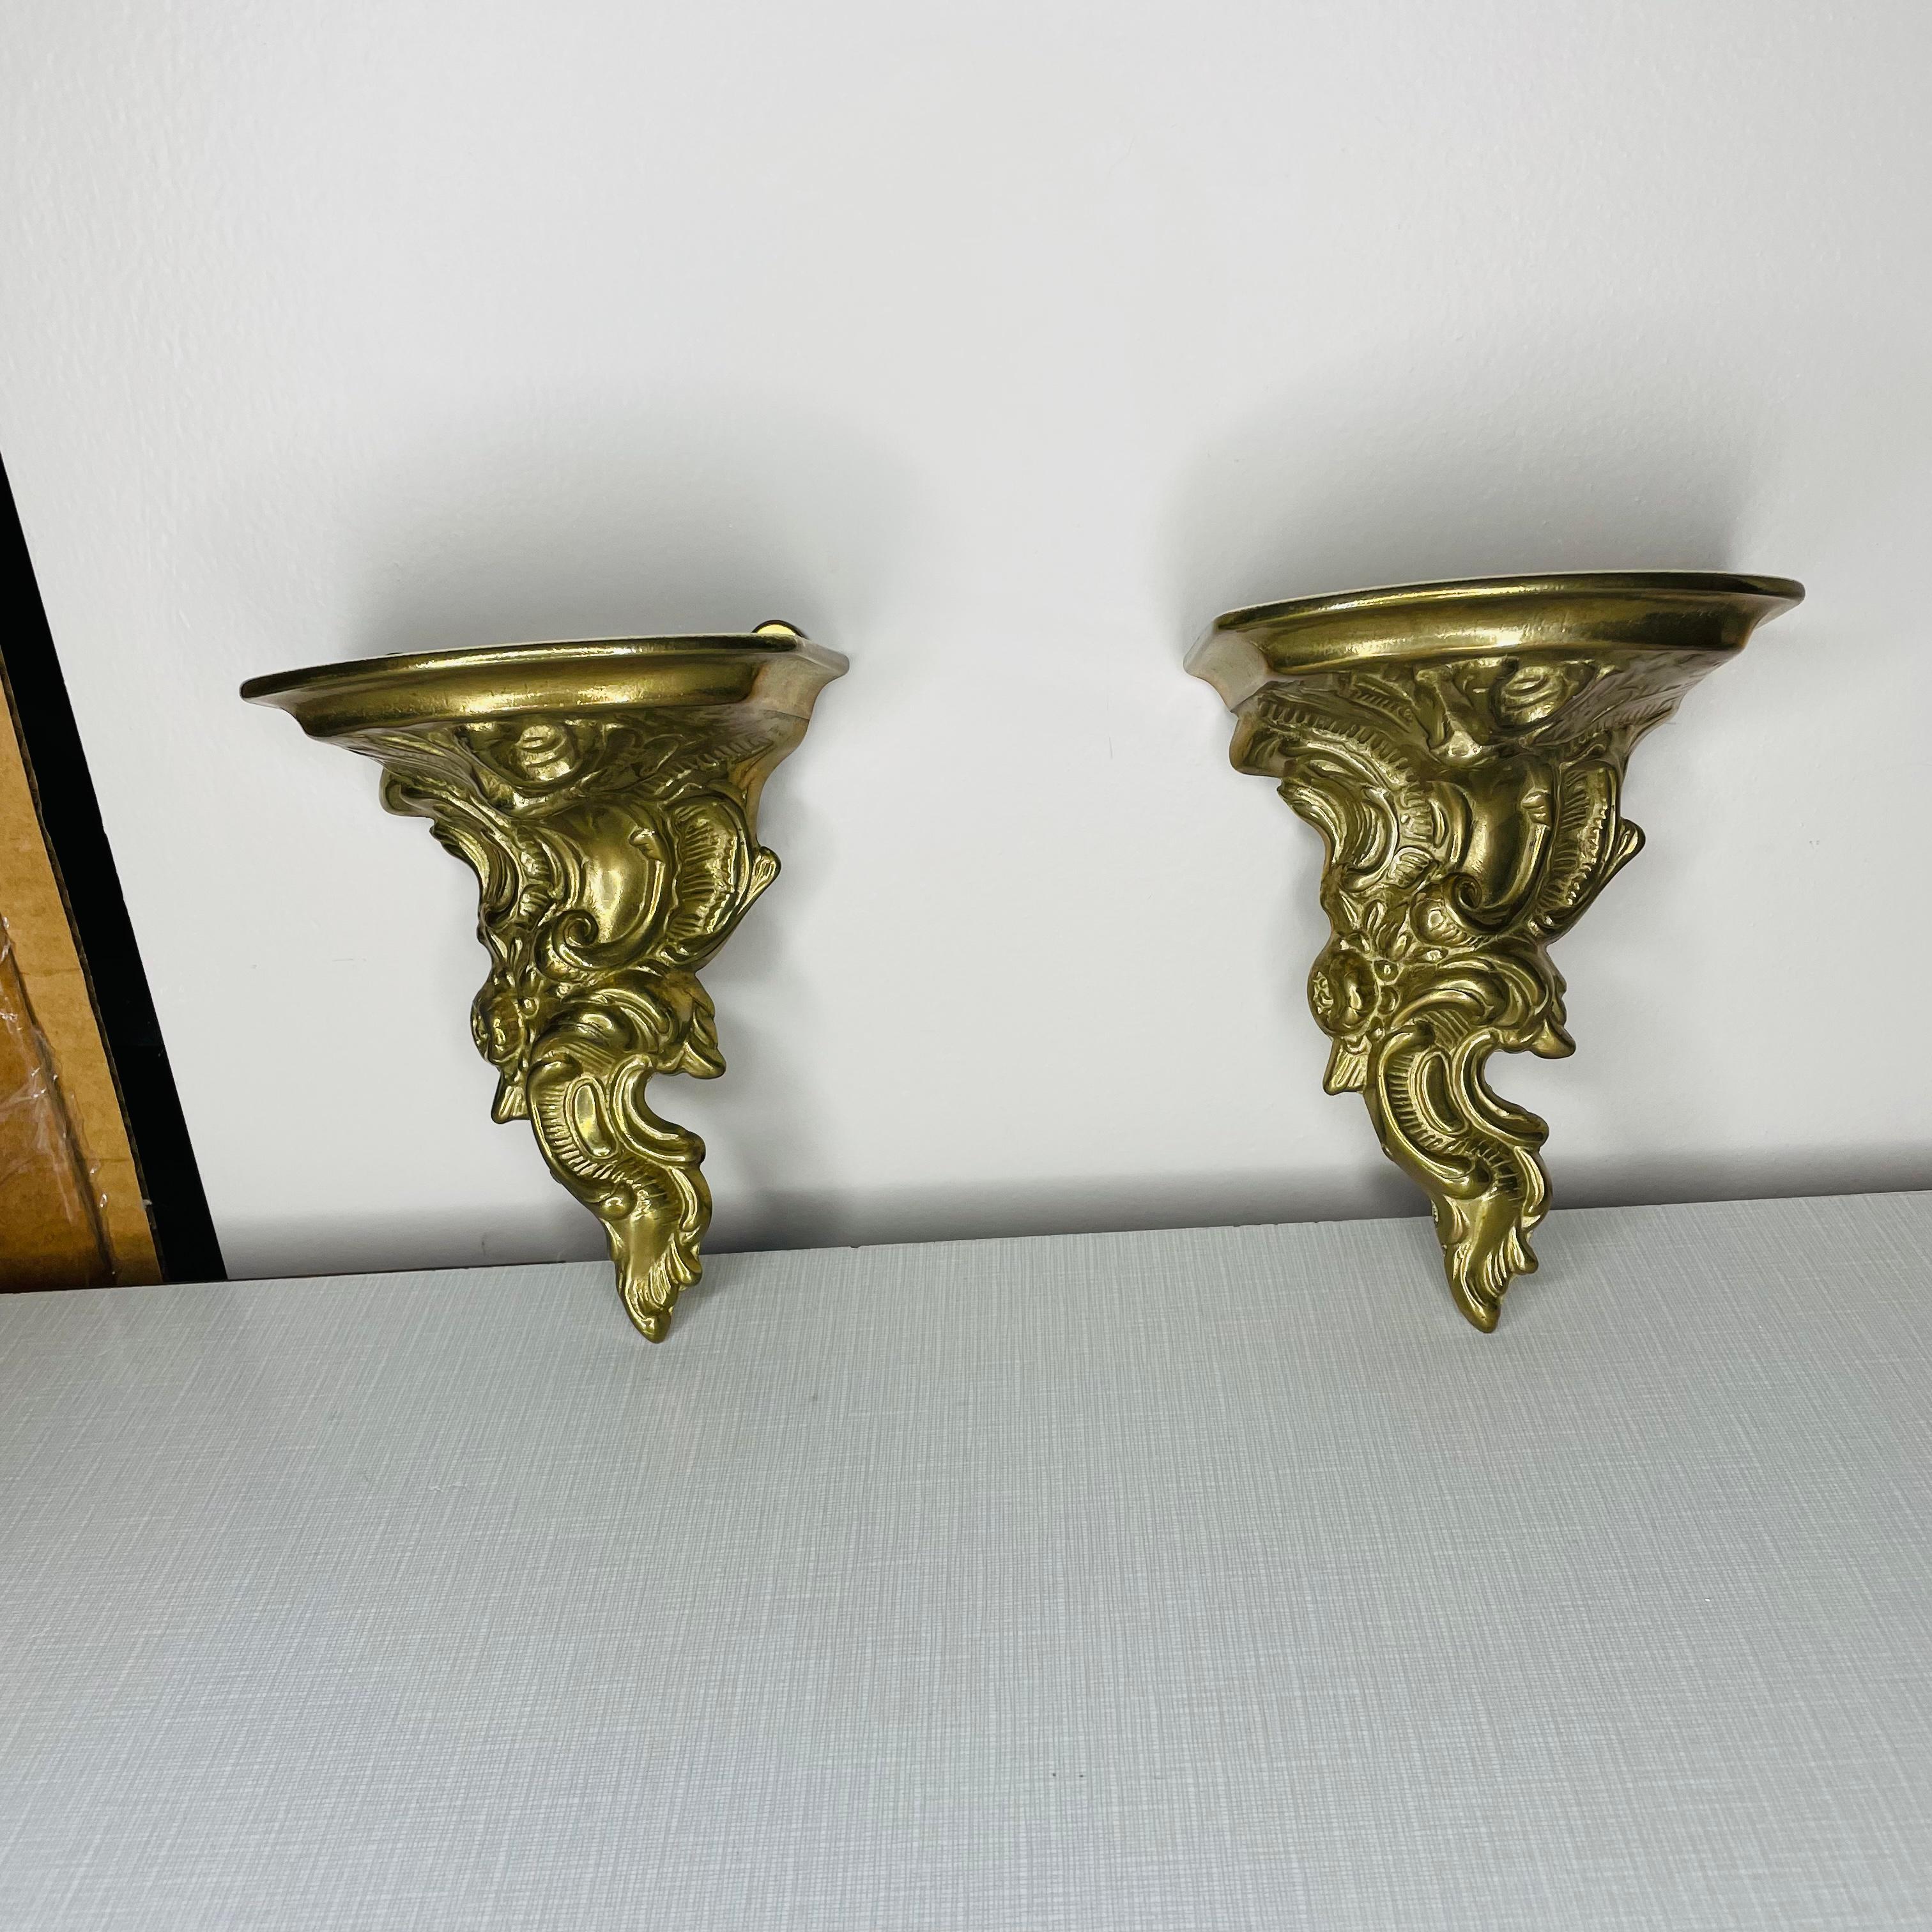 Pair of brass wall shelves in great condition. The face of each shelf has a nice patina, however the tops have been polished.